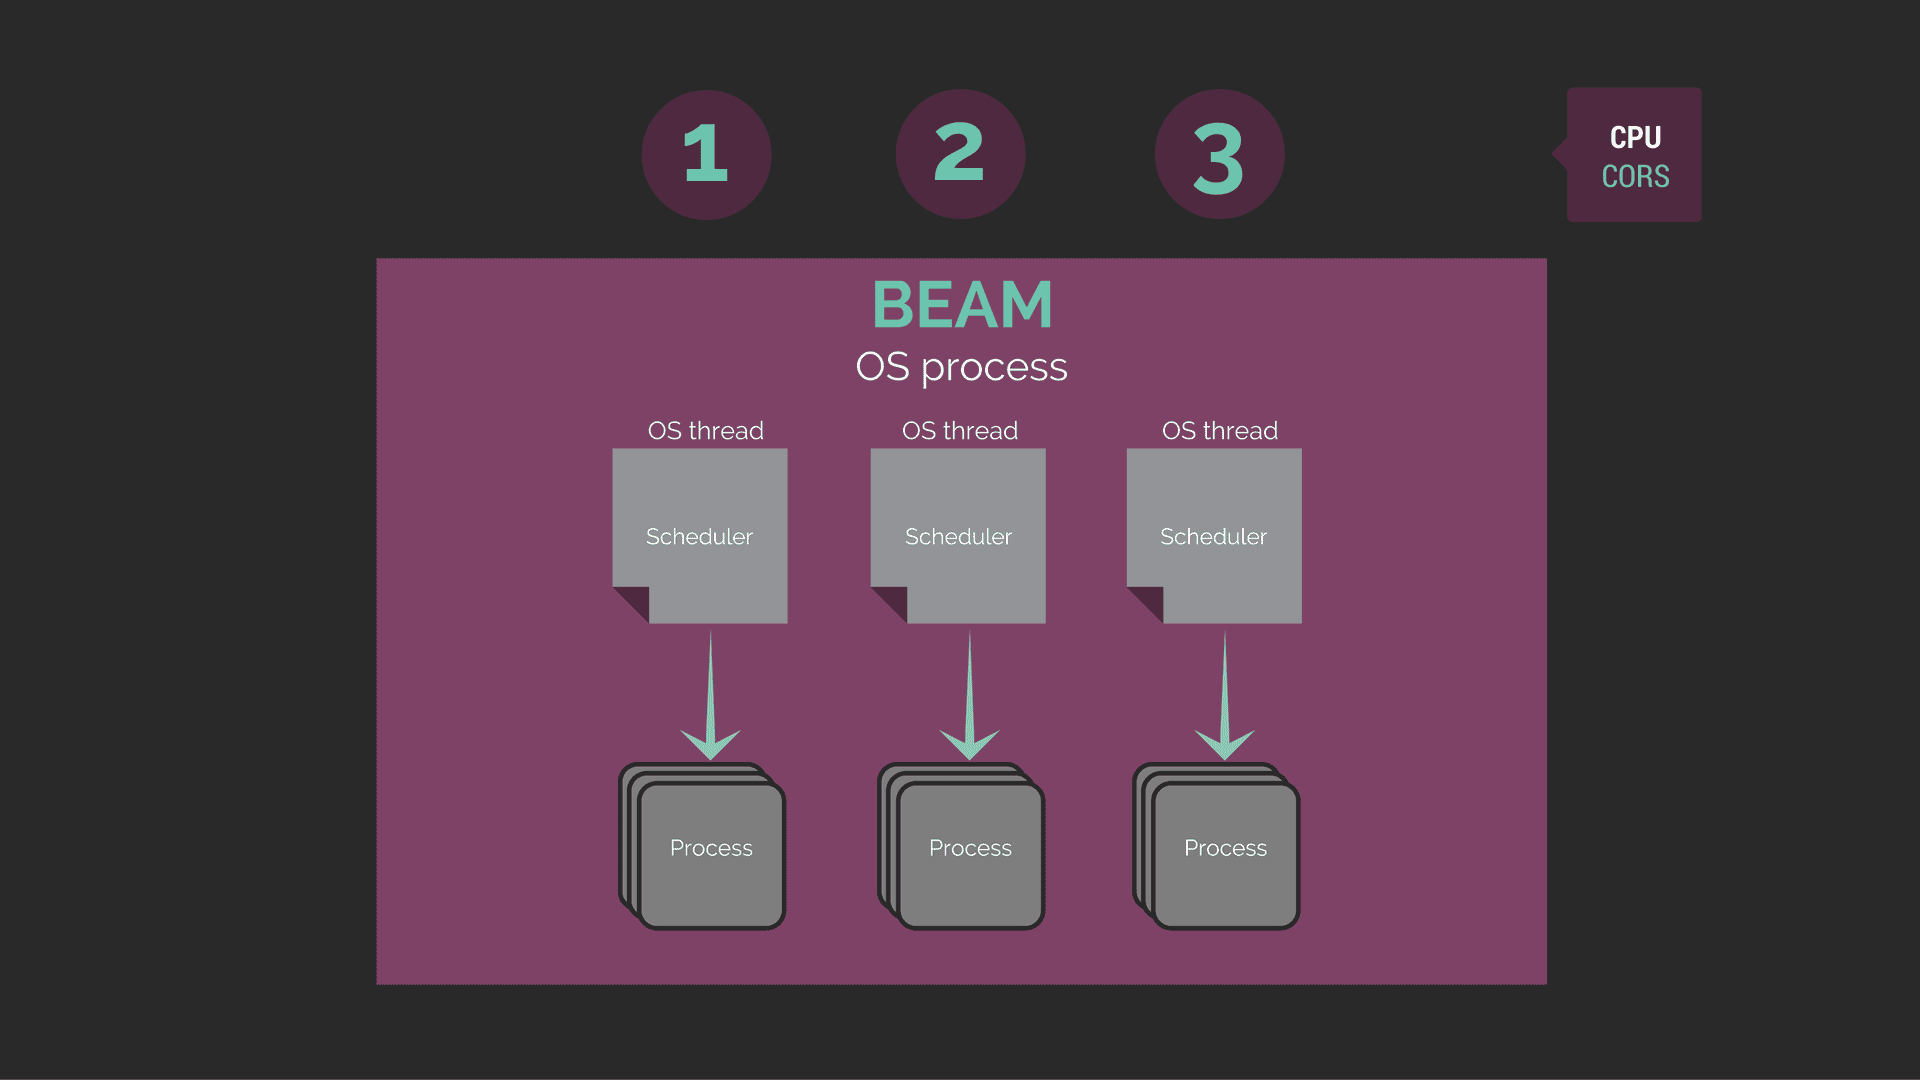 CPU Cores, OS Process, BEAM, OS Thread, Schedulers, Processes